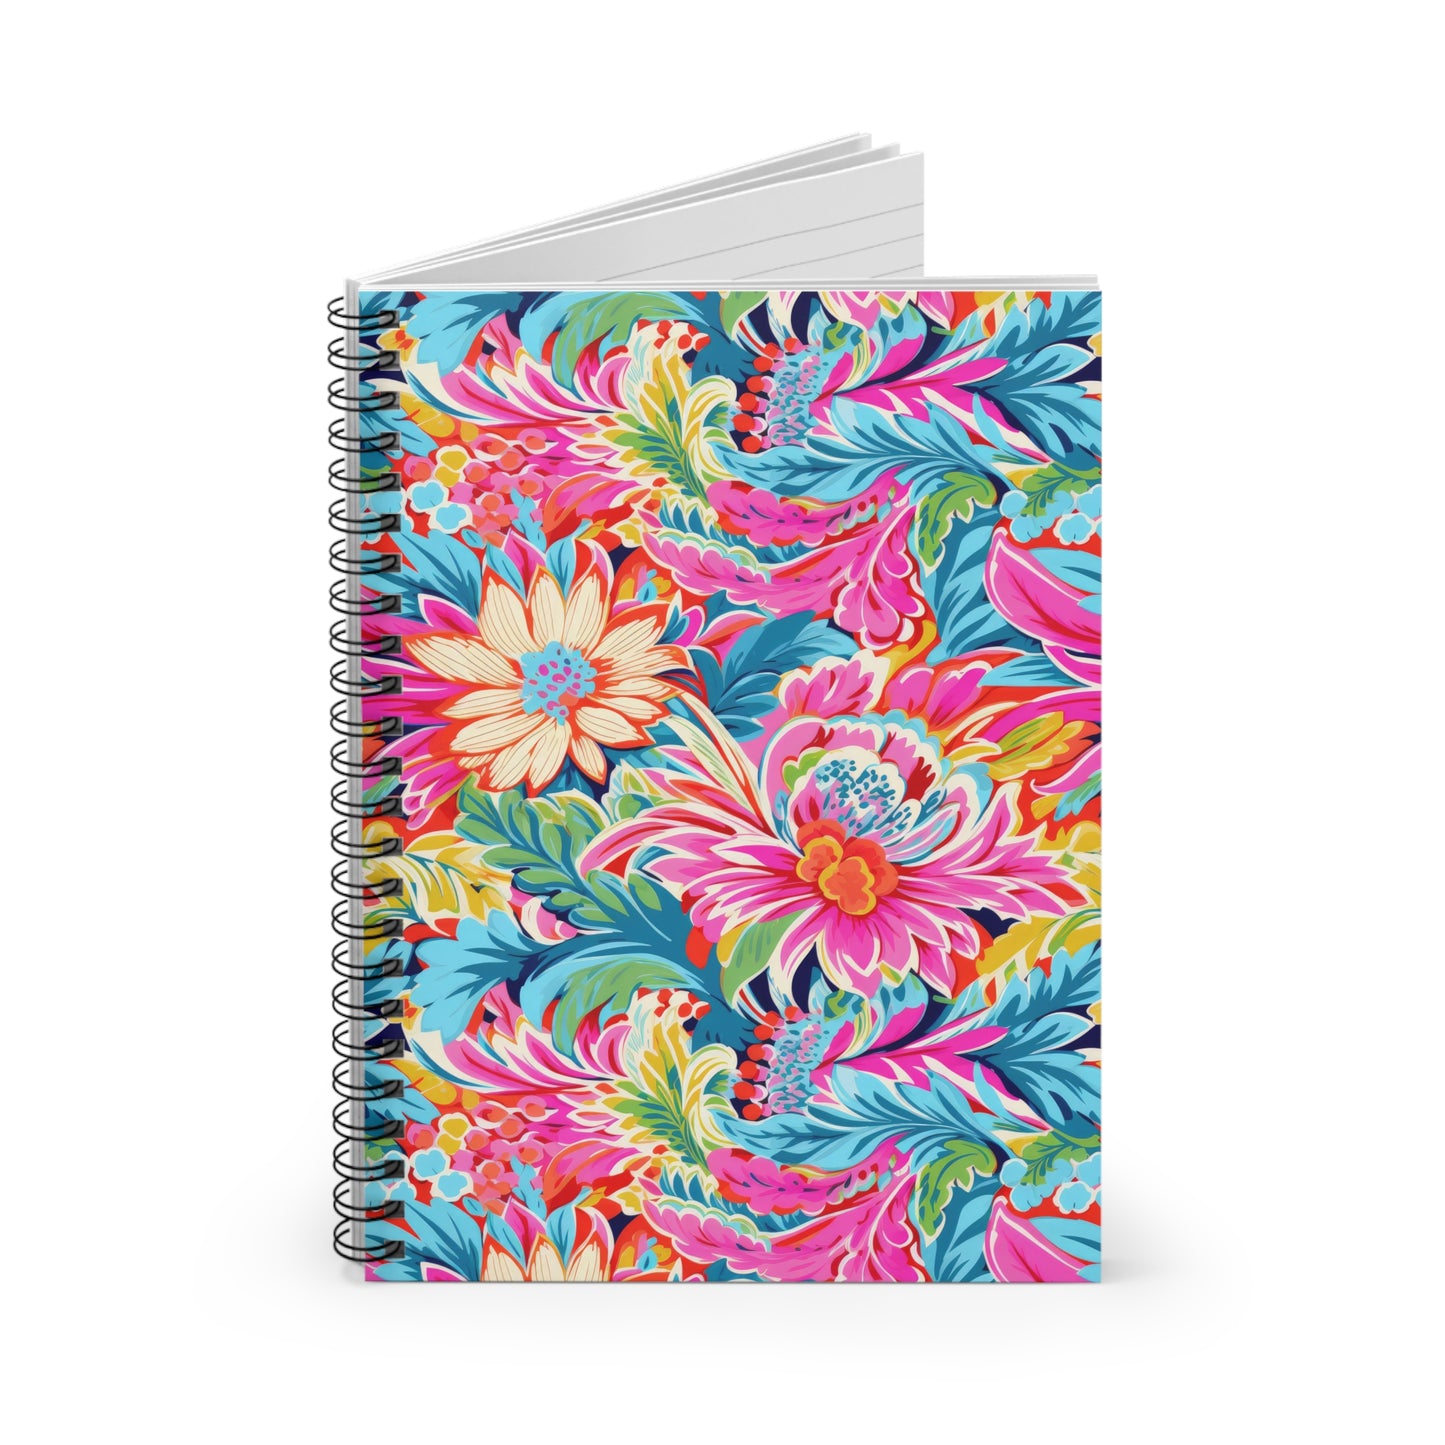 Coastal Summer Blooms: Bright Floral Watercolors in Coastal Hues Spiral Ruled Line Notebook